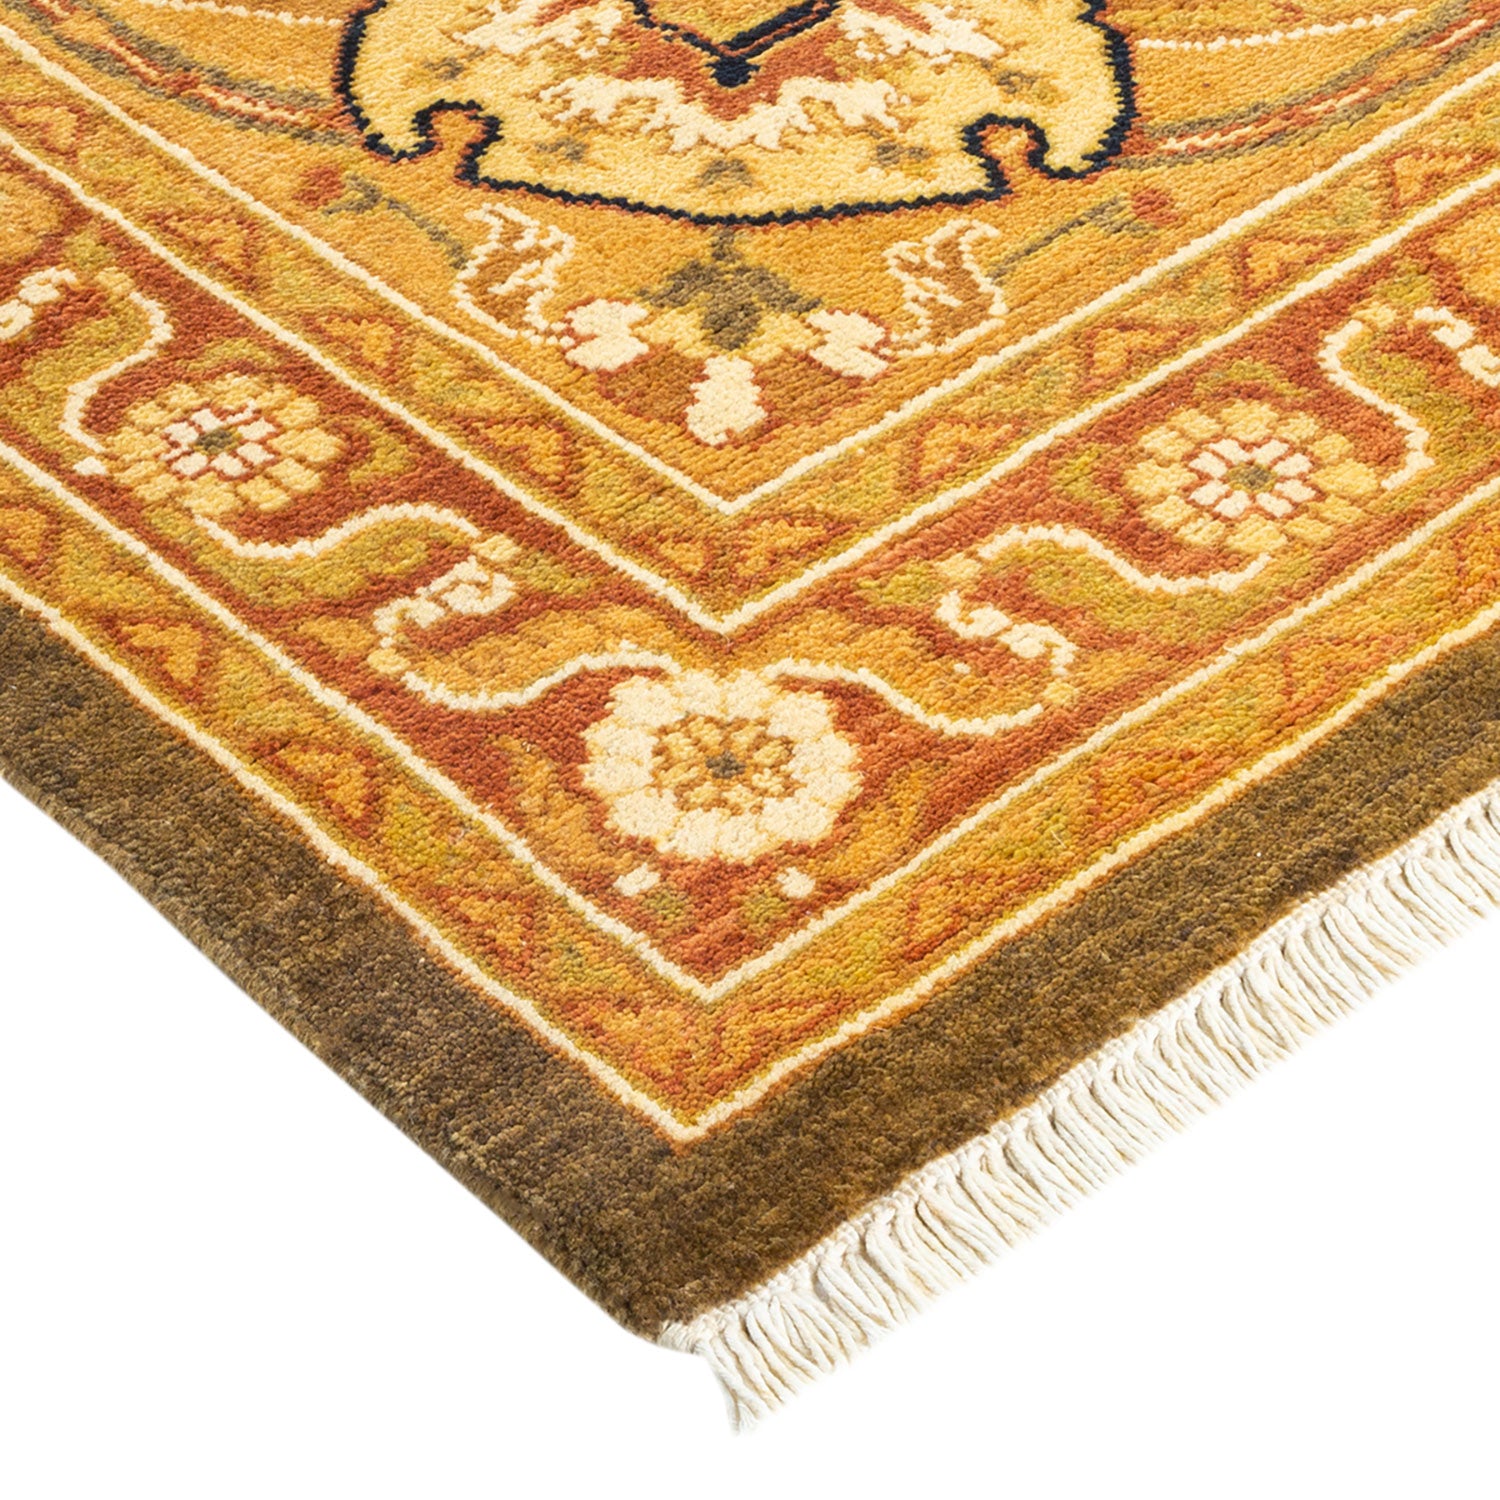 Close-up of vibrant, intricate rug with geometric and floral patterns.